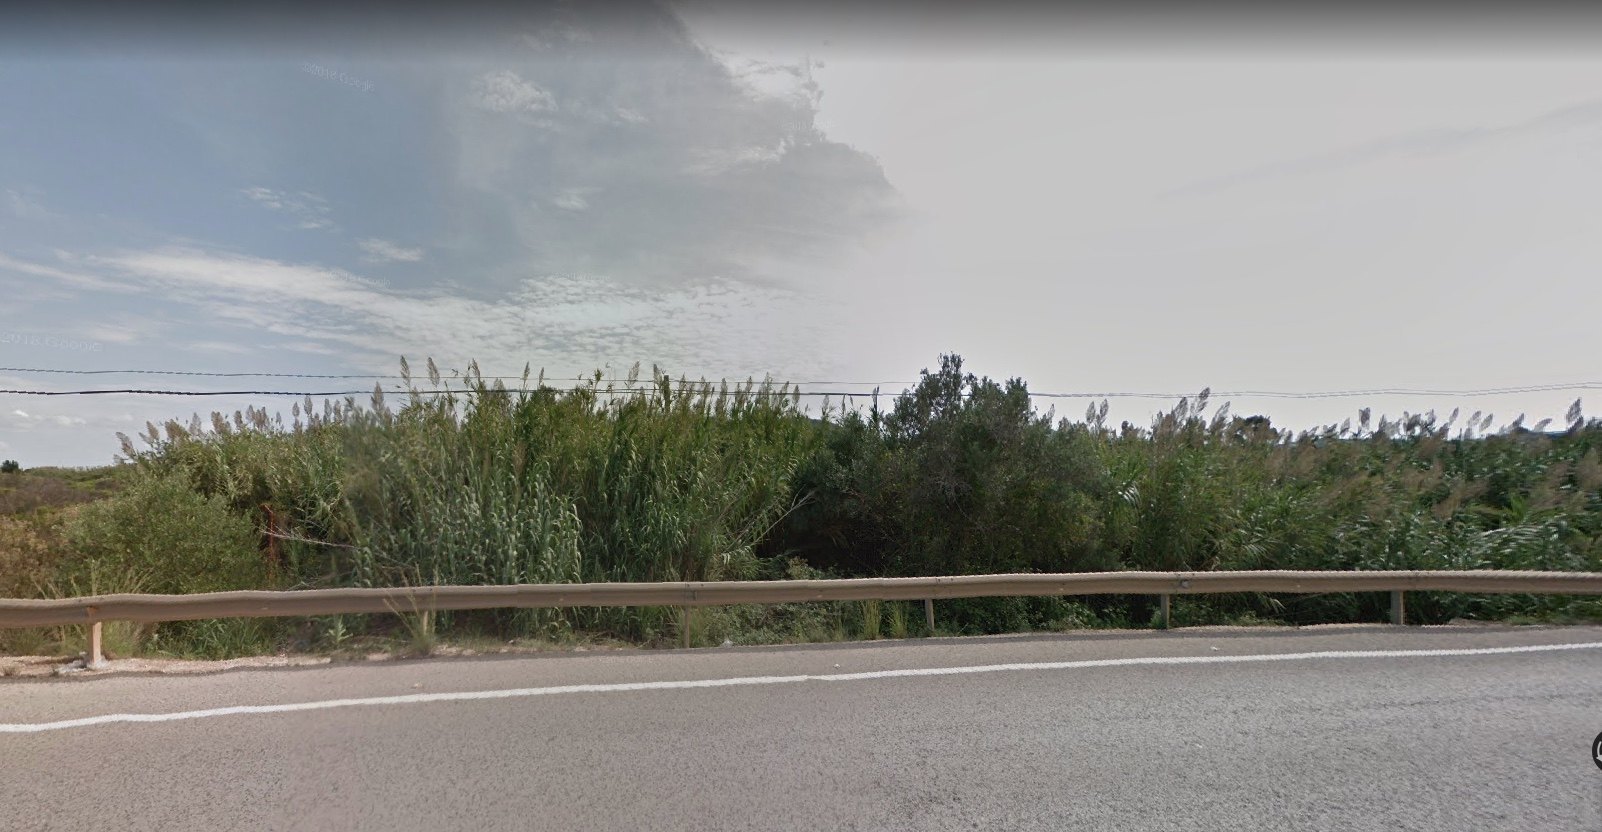 AGRICULTURAL PLOTS FOR SALE IN CATARROGES JAVEA - COSTA BLANCA